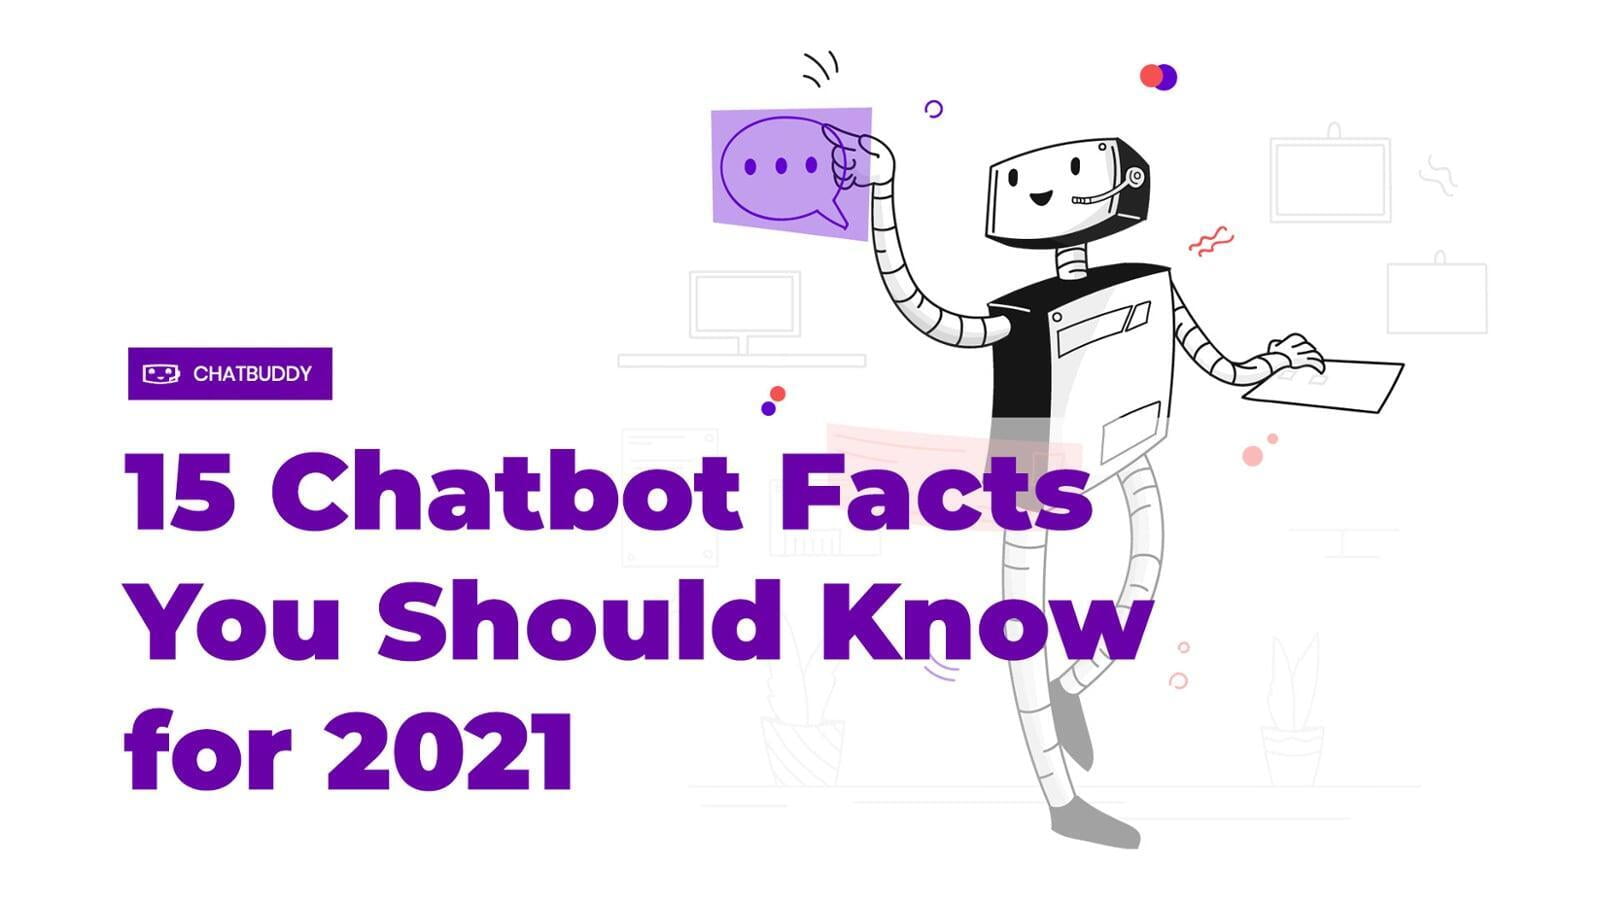 15 Chatbot Facts You Should Know for 2021